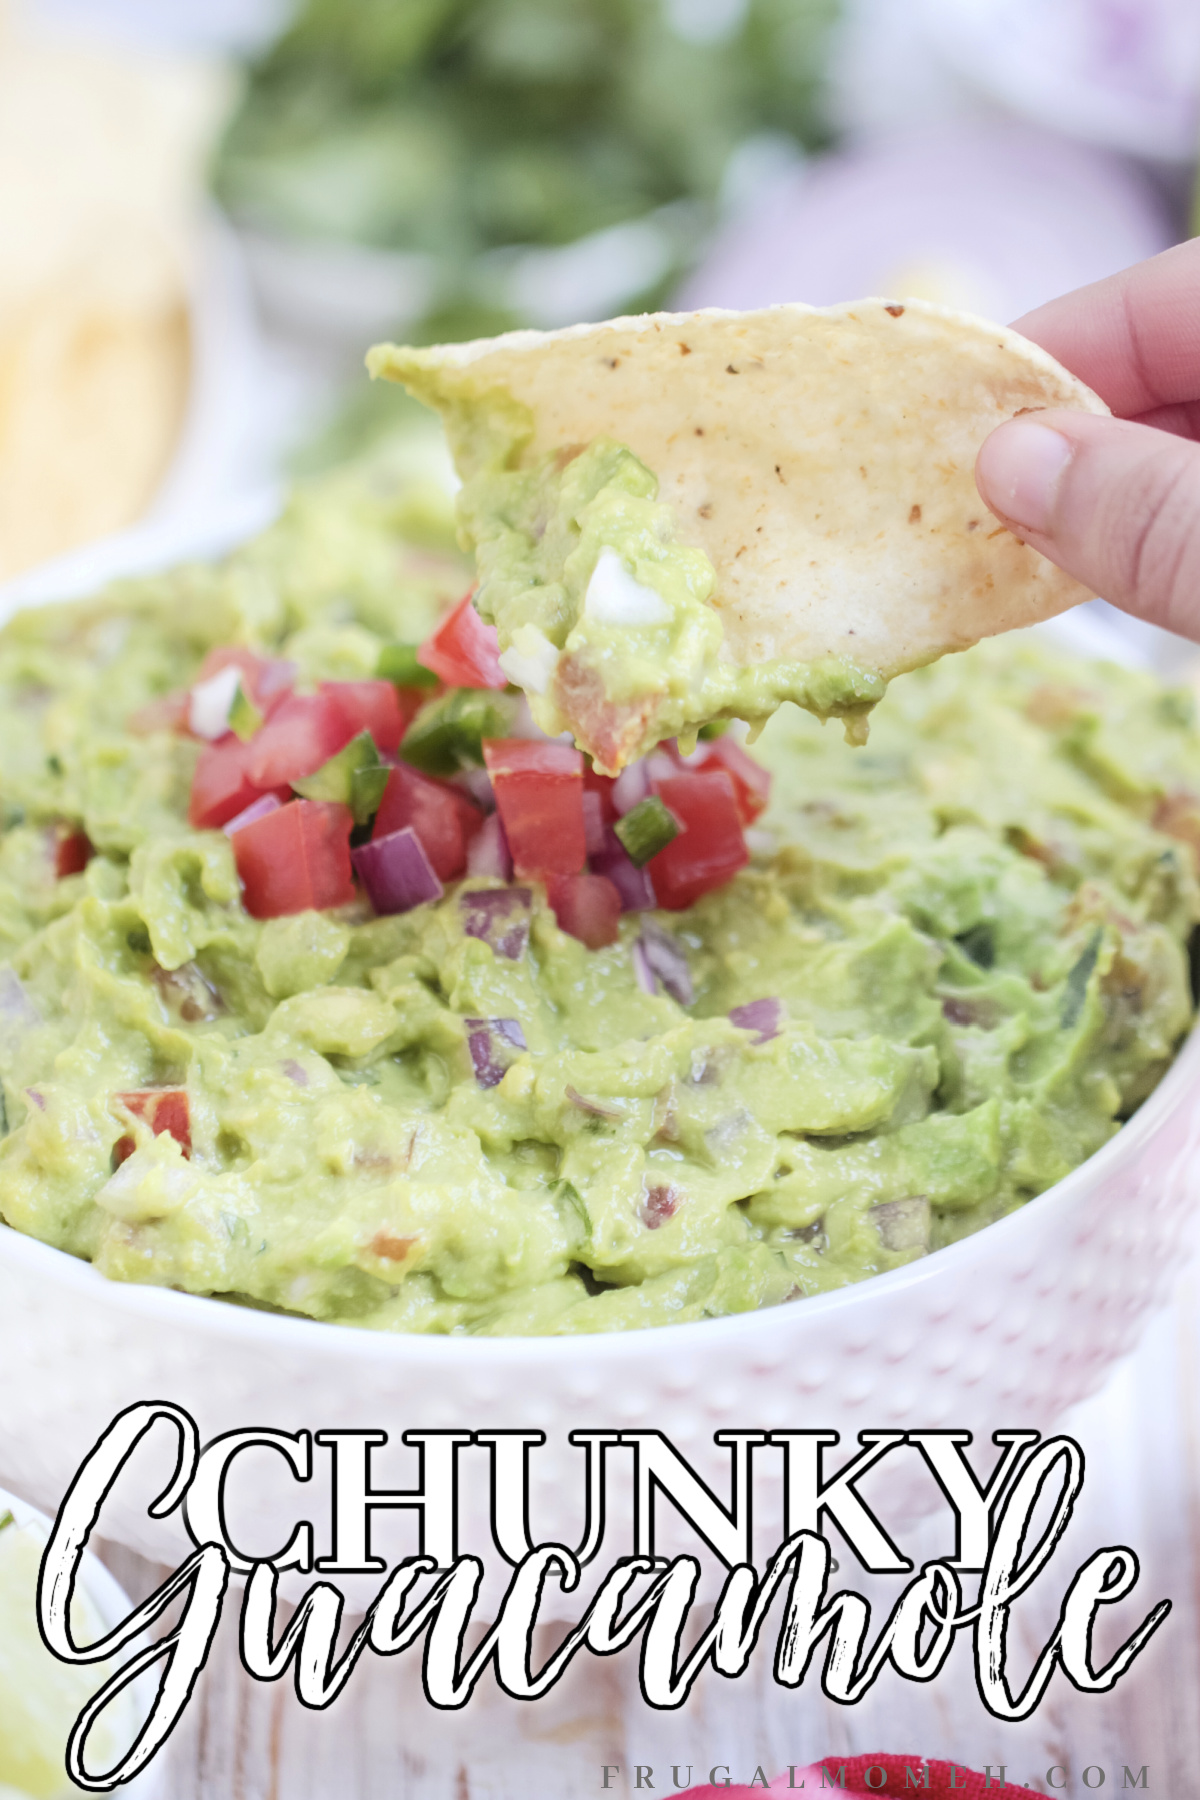 Get your guac on with this tasty chunky guacamole recipe. Perfect for any occasion, it's sure to be a hit with everyone at the table!